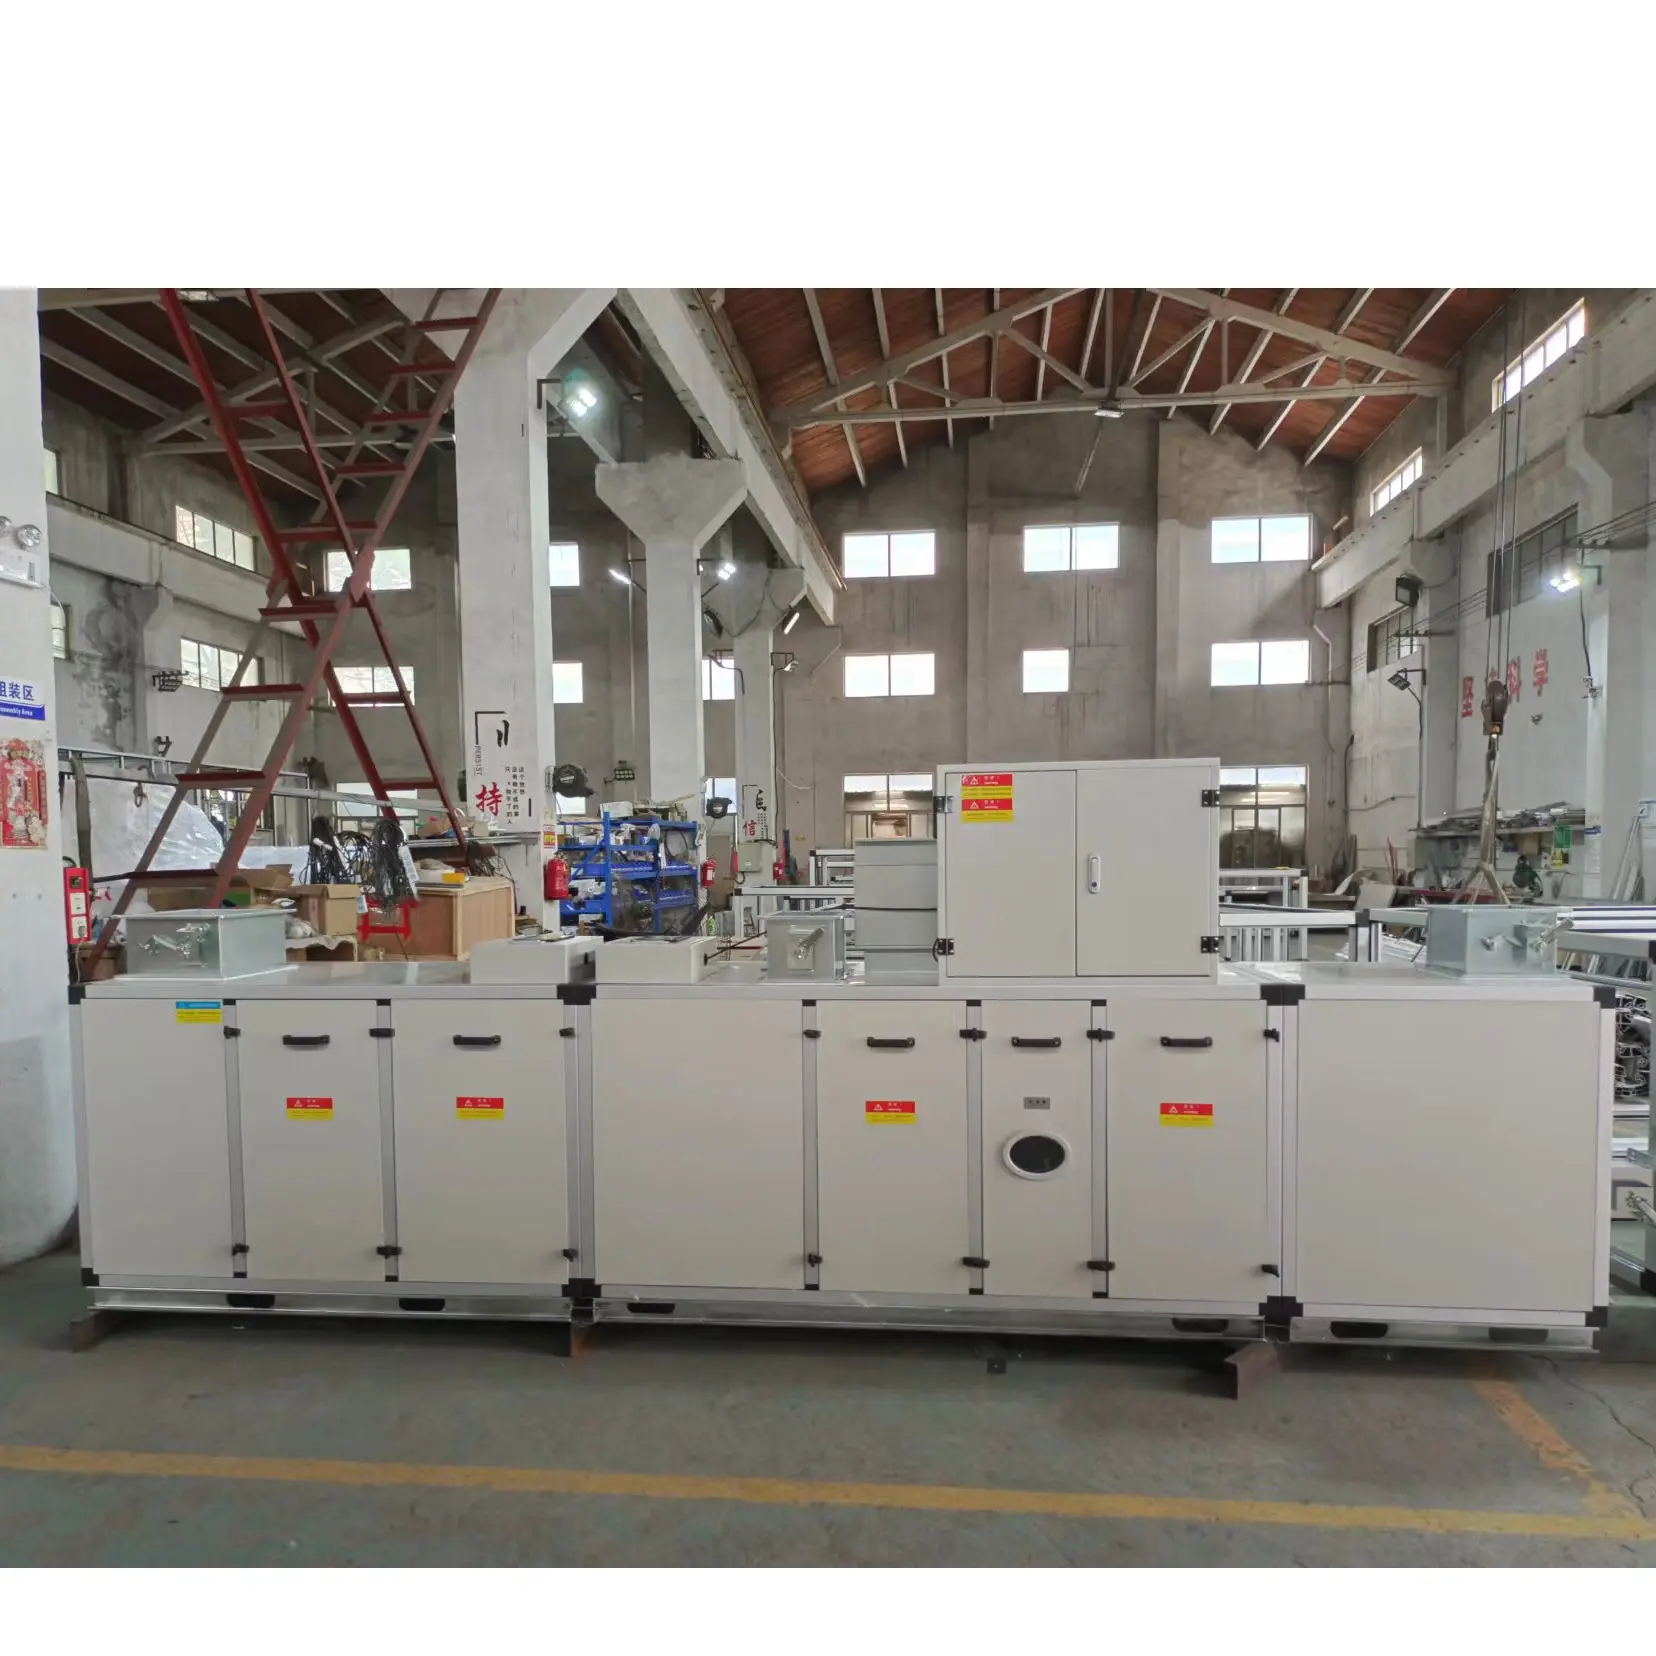 HVAC Heating And Cooling System Air Conditioning Unit Farm Greenhouse Desiccant Industrial Grow Room Dehumidifier